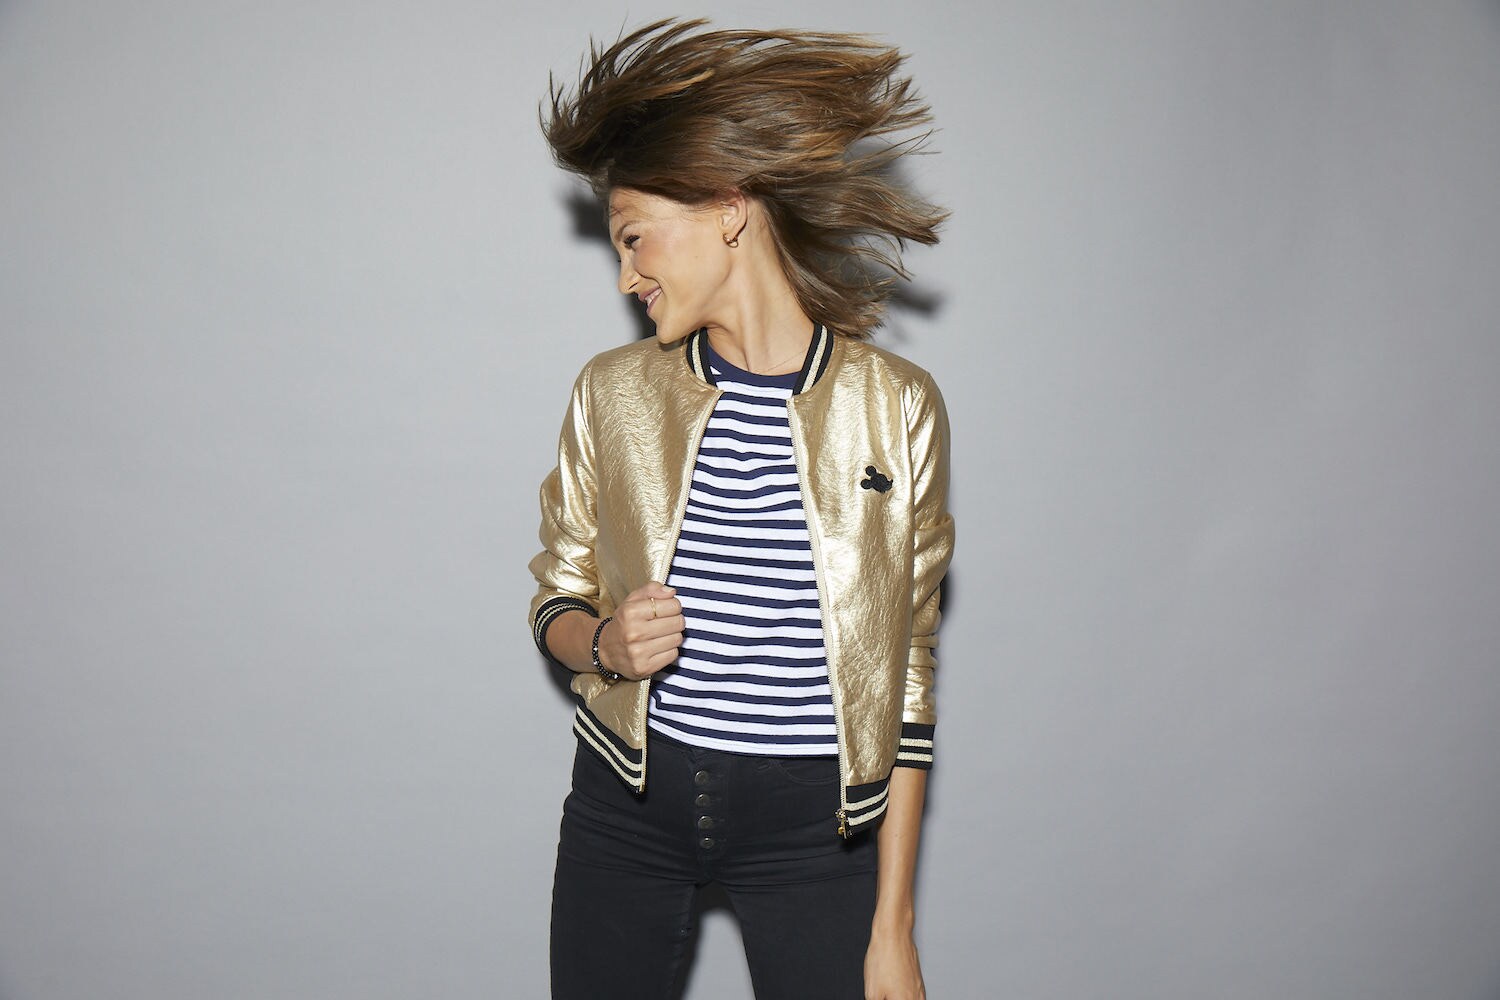 Model sporting a Mickey Mouse Gold jacket